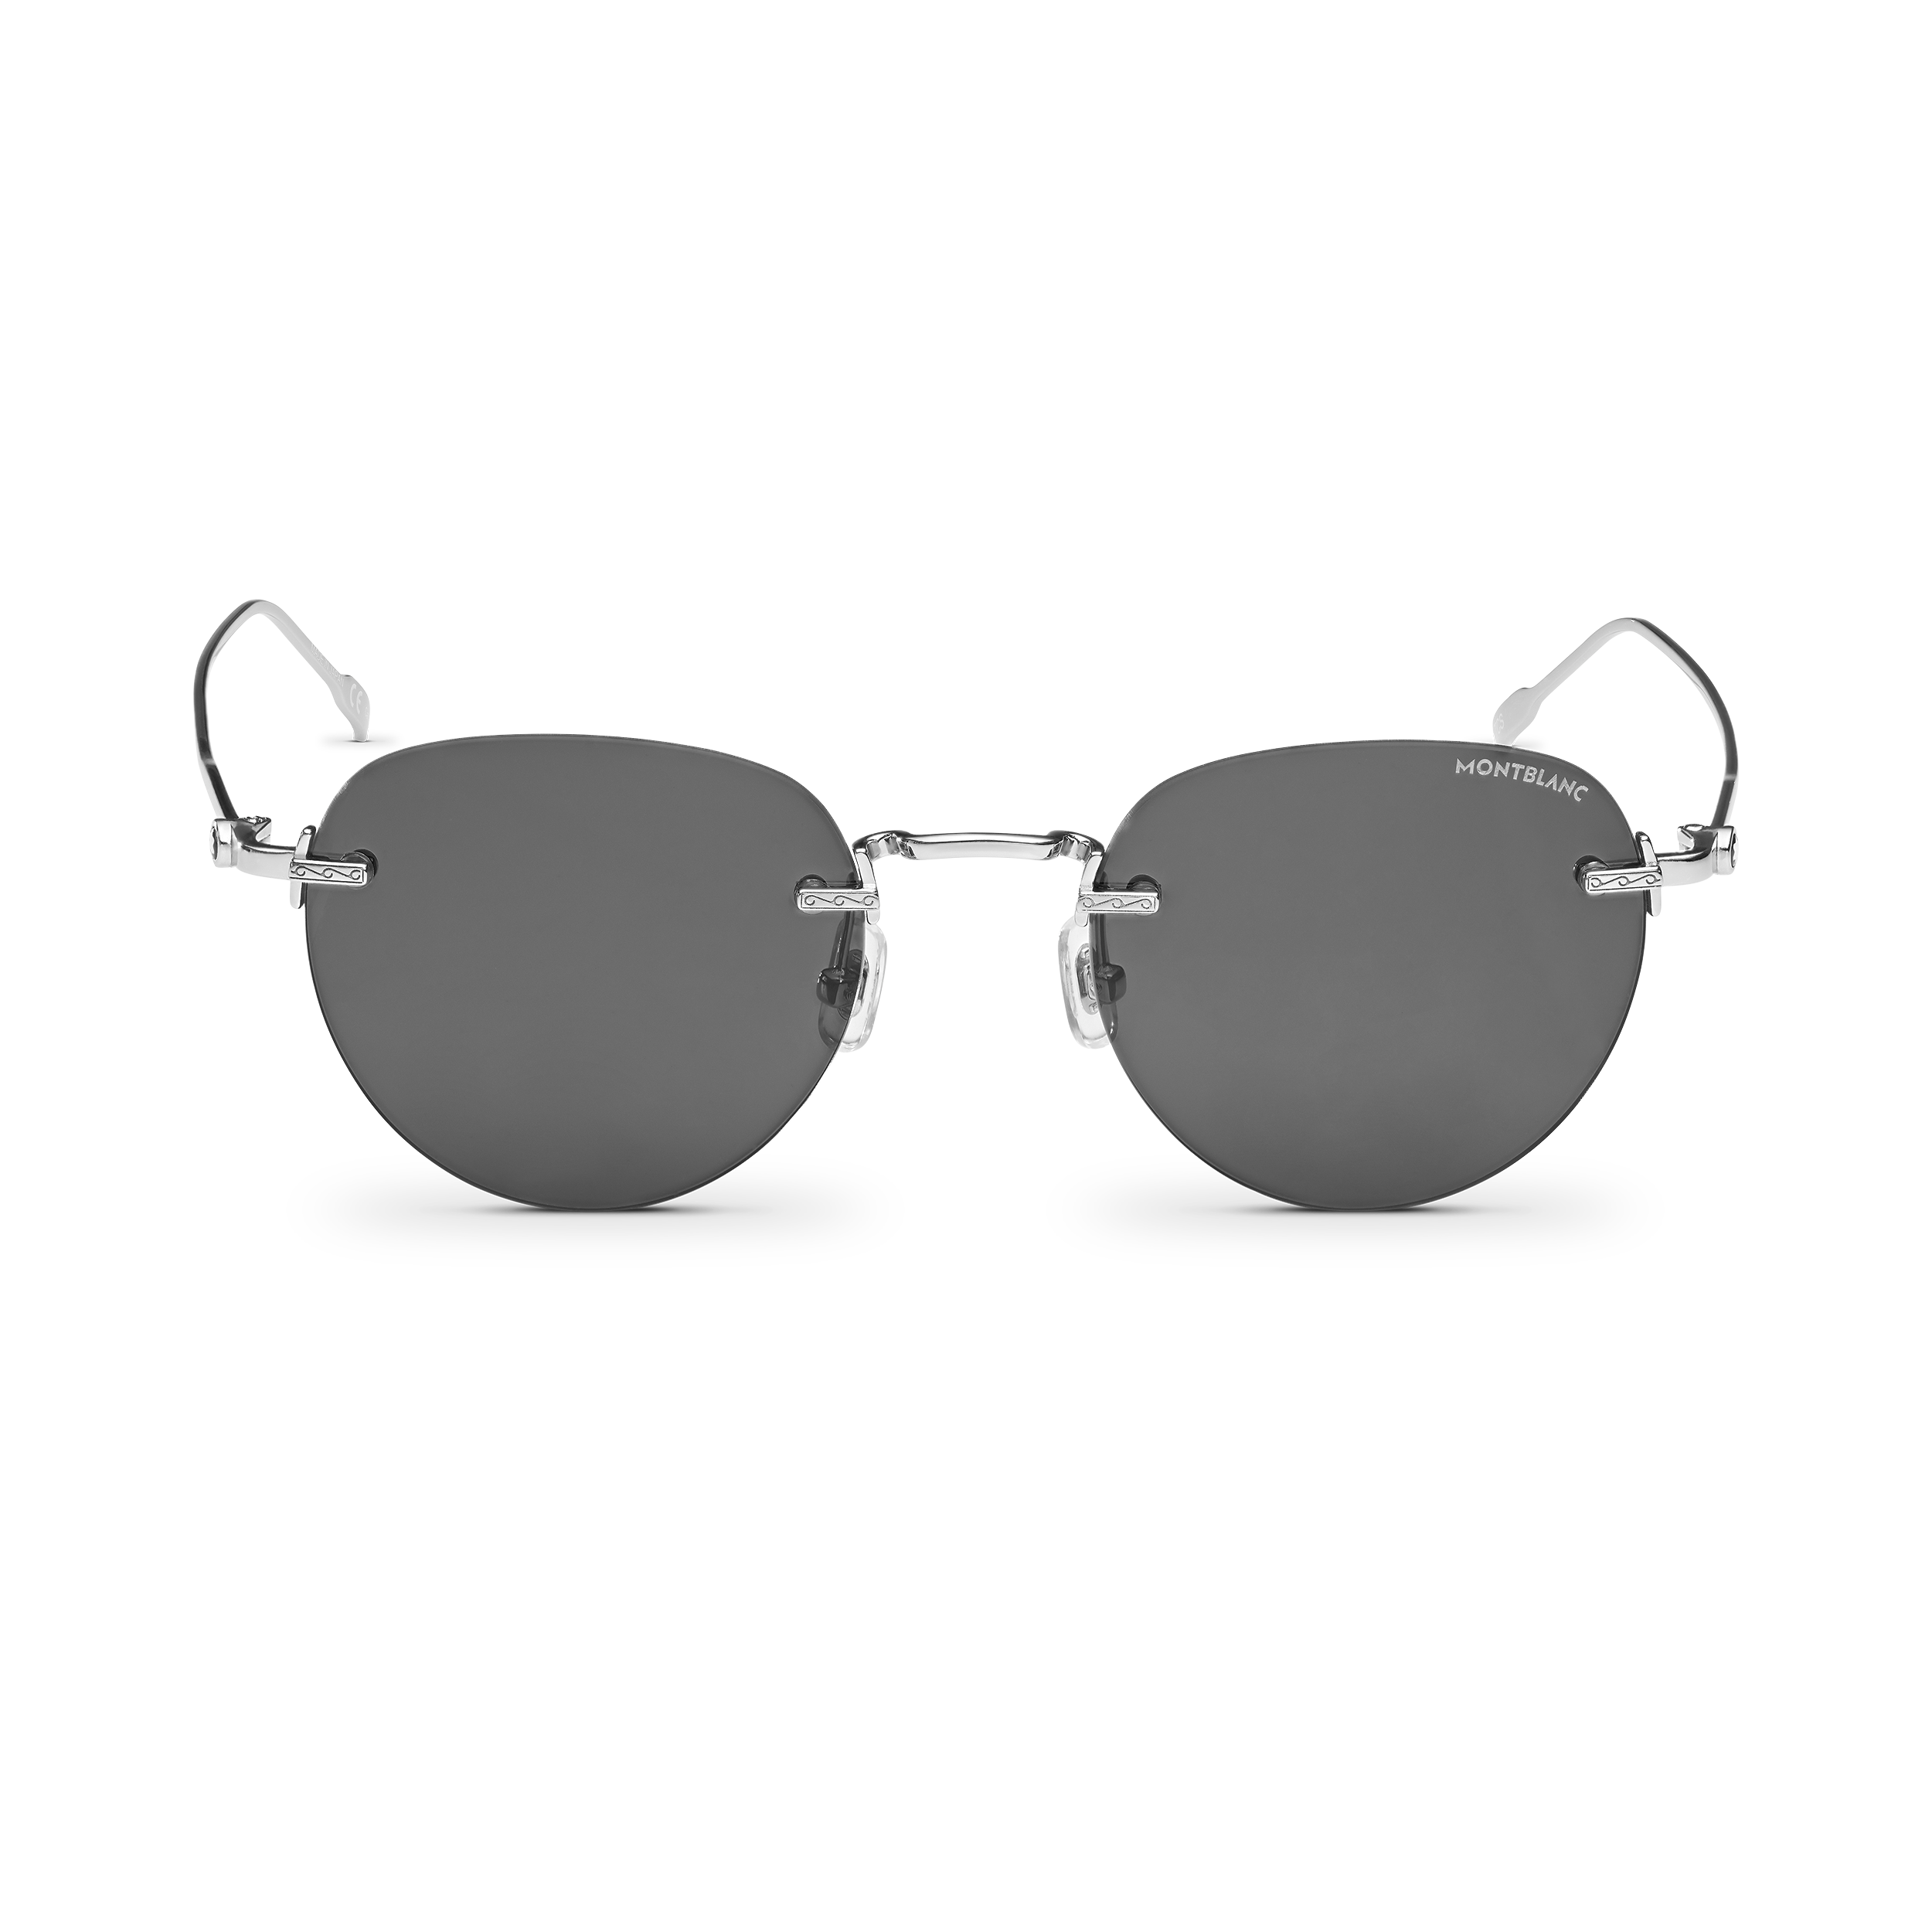 Round Sunglasses with Silver Colored Metal Frame